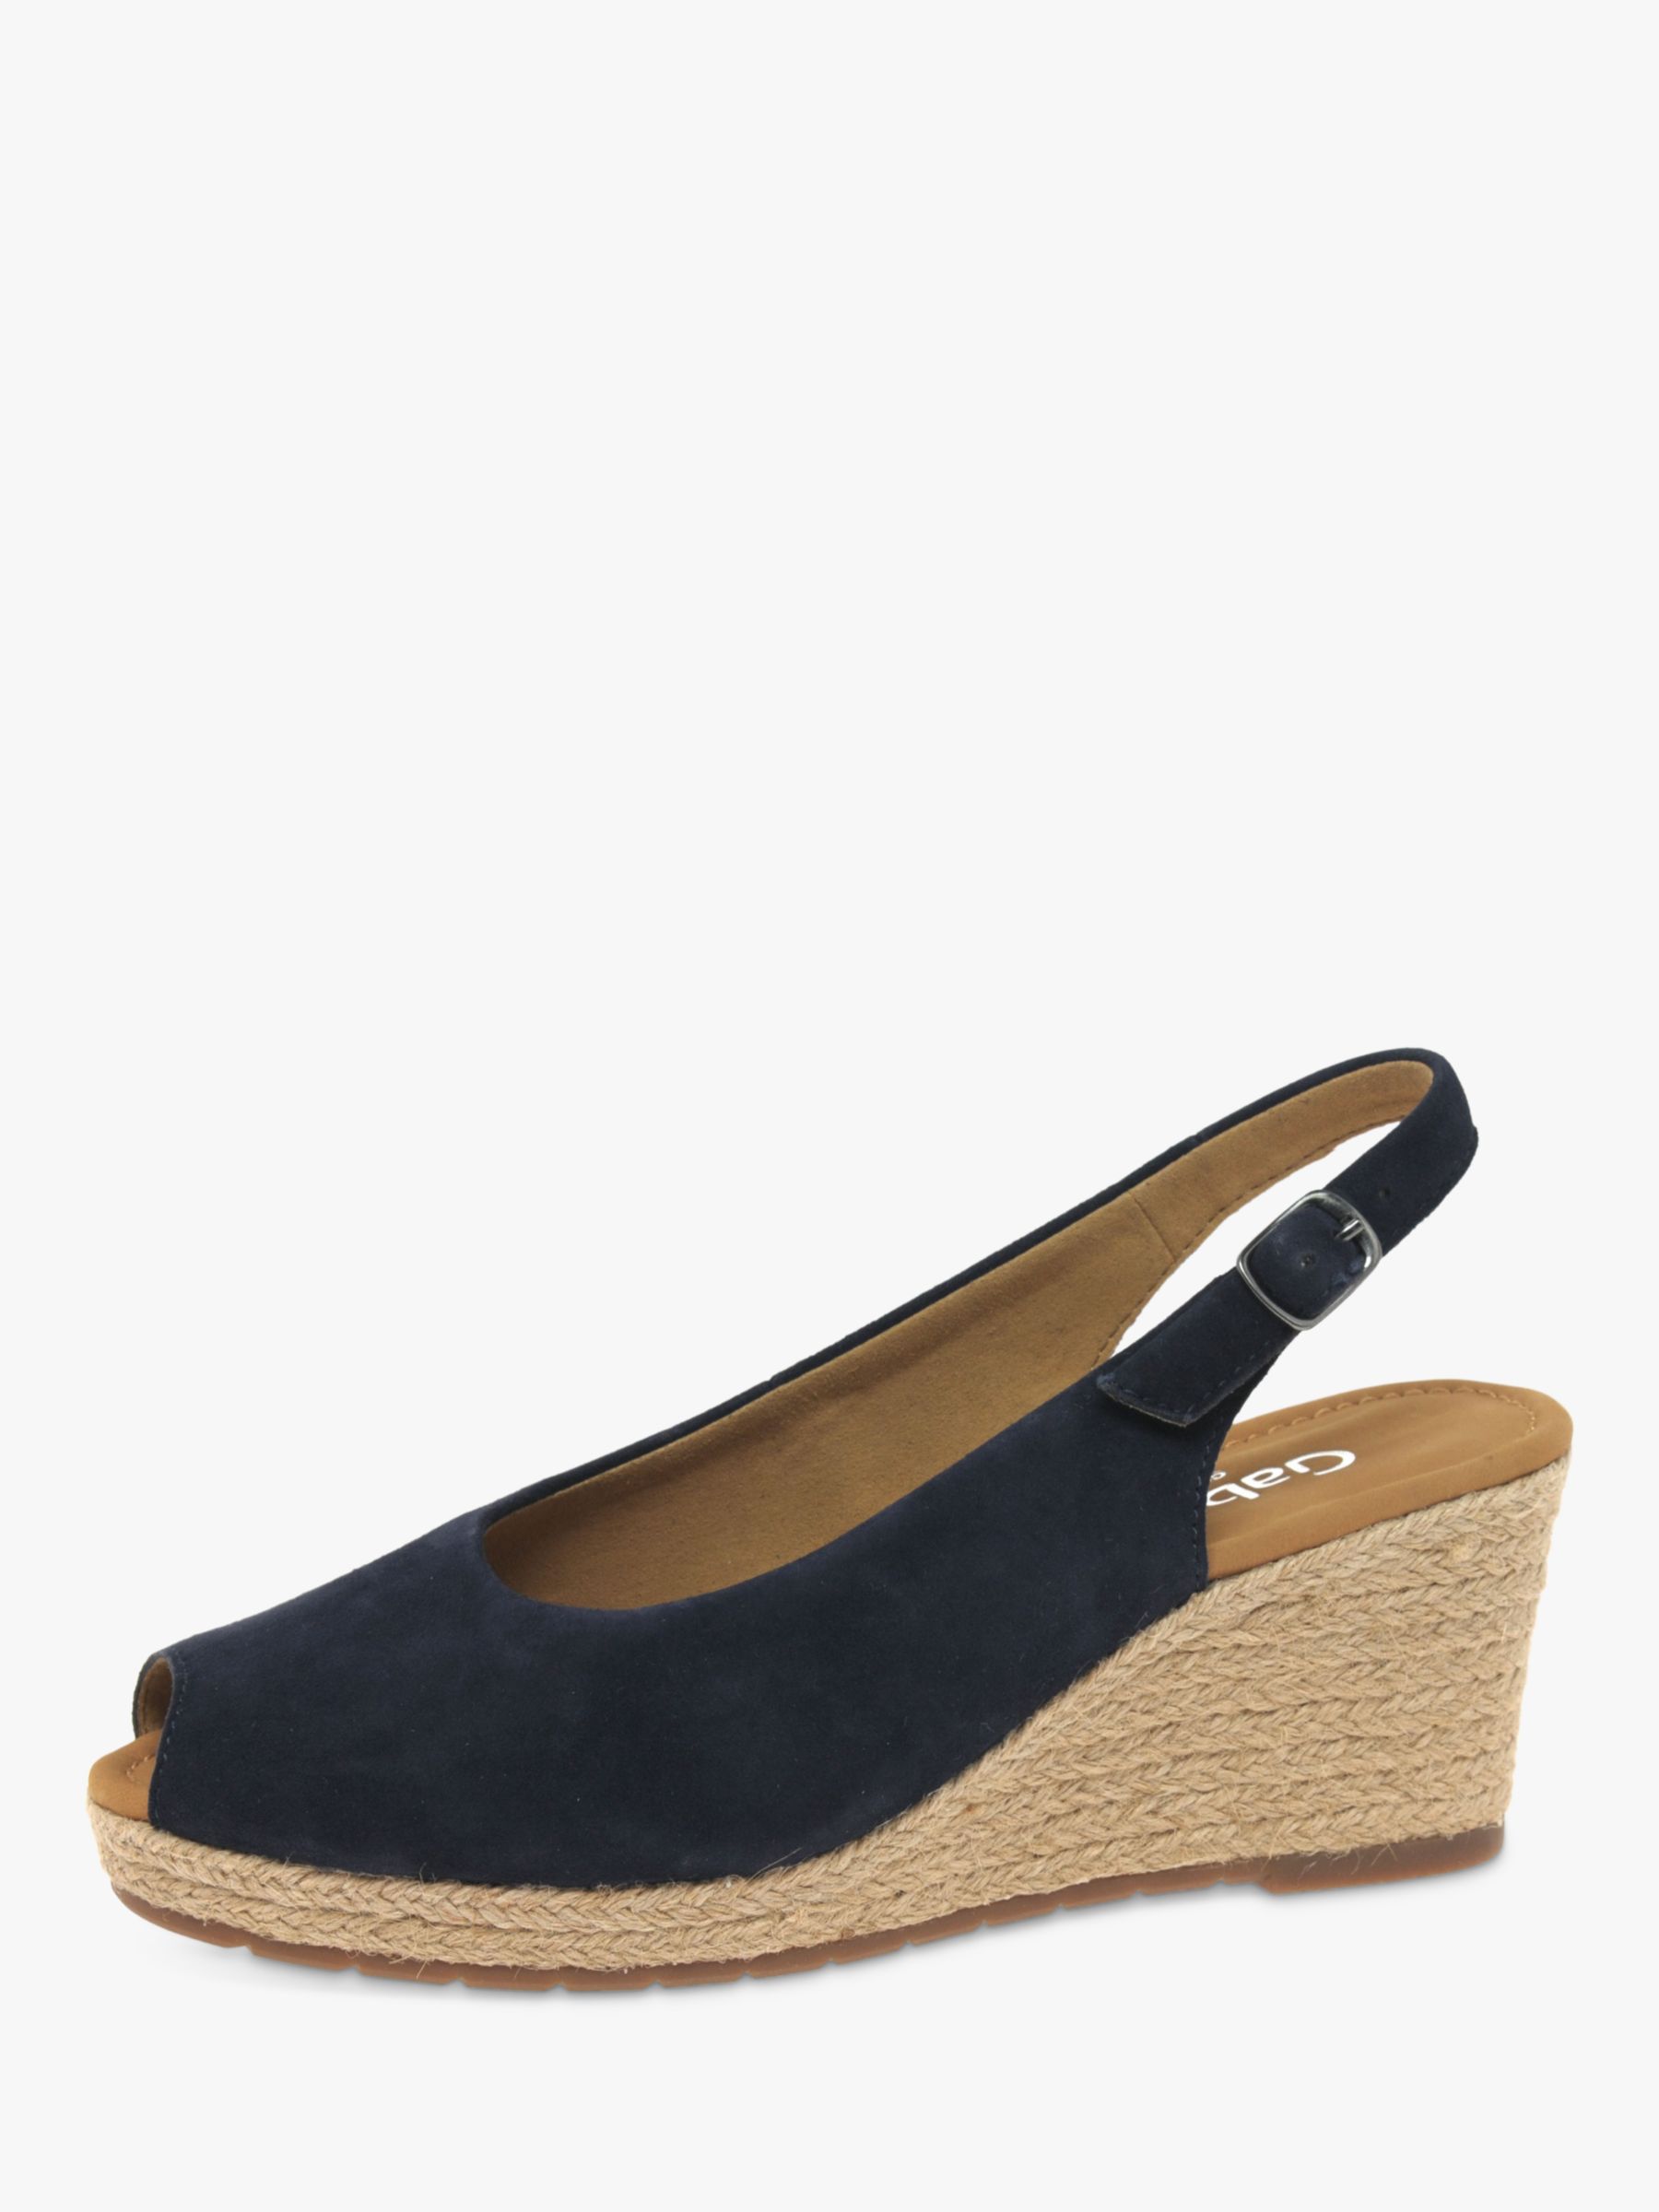 Gabor Tandy Wide Fit Suede Slingback Sandals, Navy at John Lewis & Partners